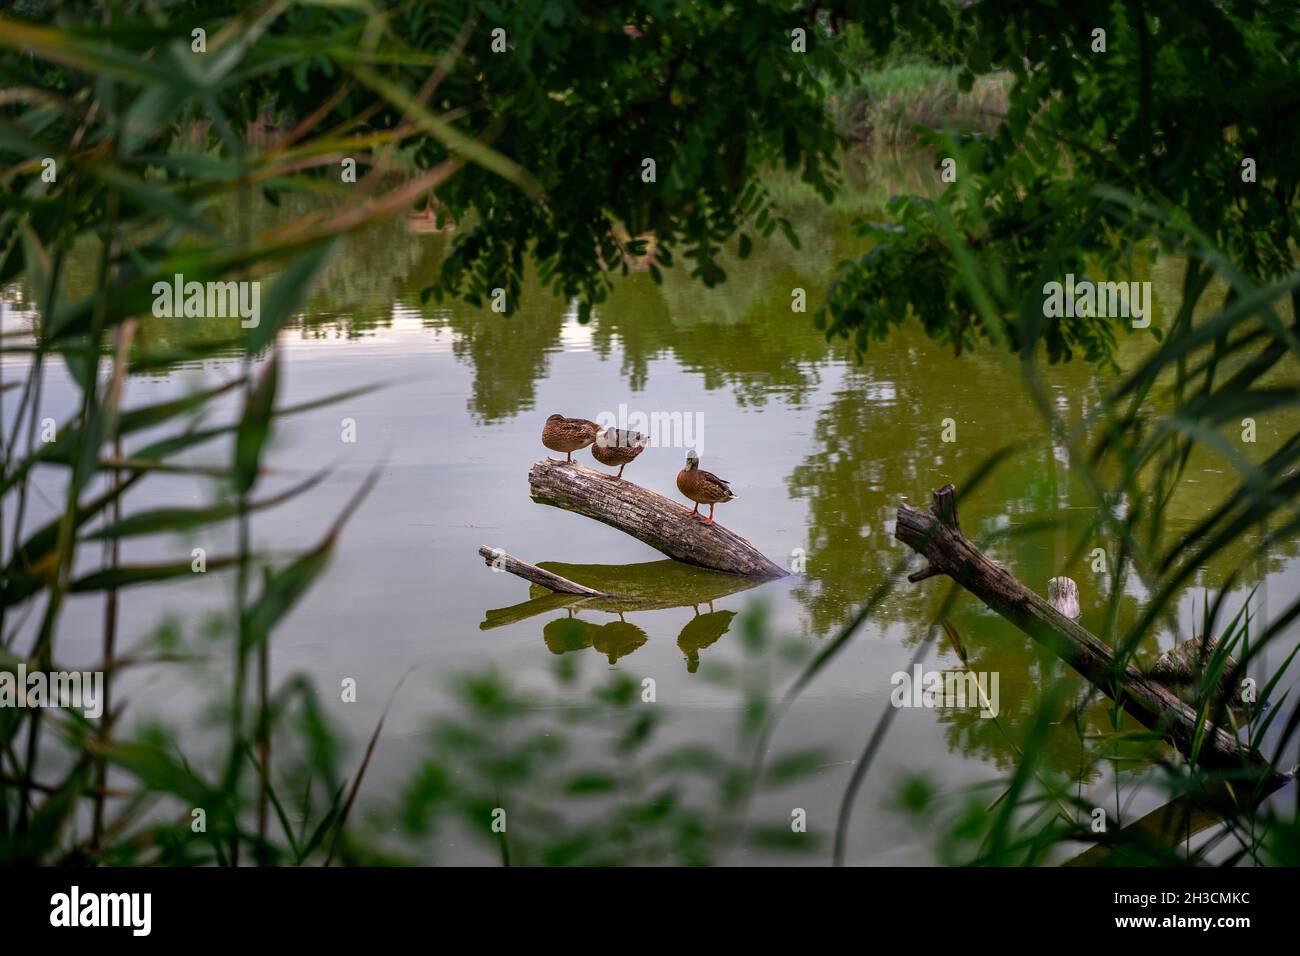 Three Ducks sitting on a tree branch coming out of water, framed by reeds, Dunakeszi, Hungary Stock Photo